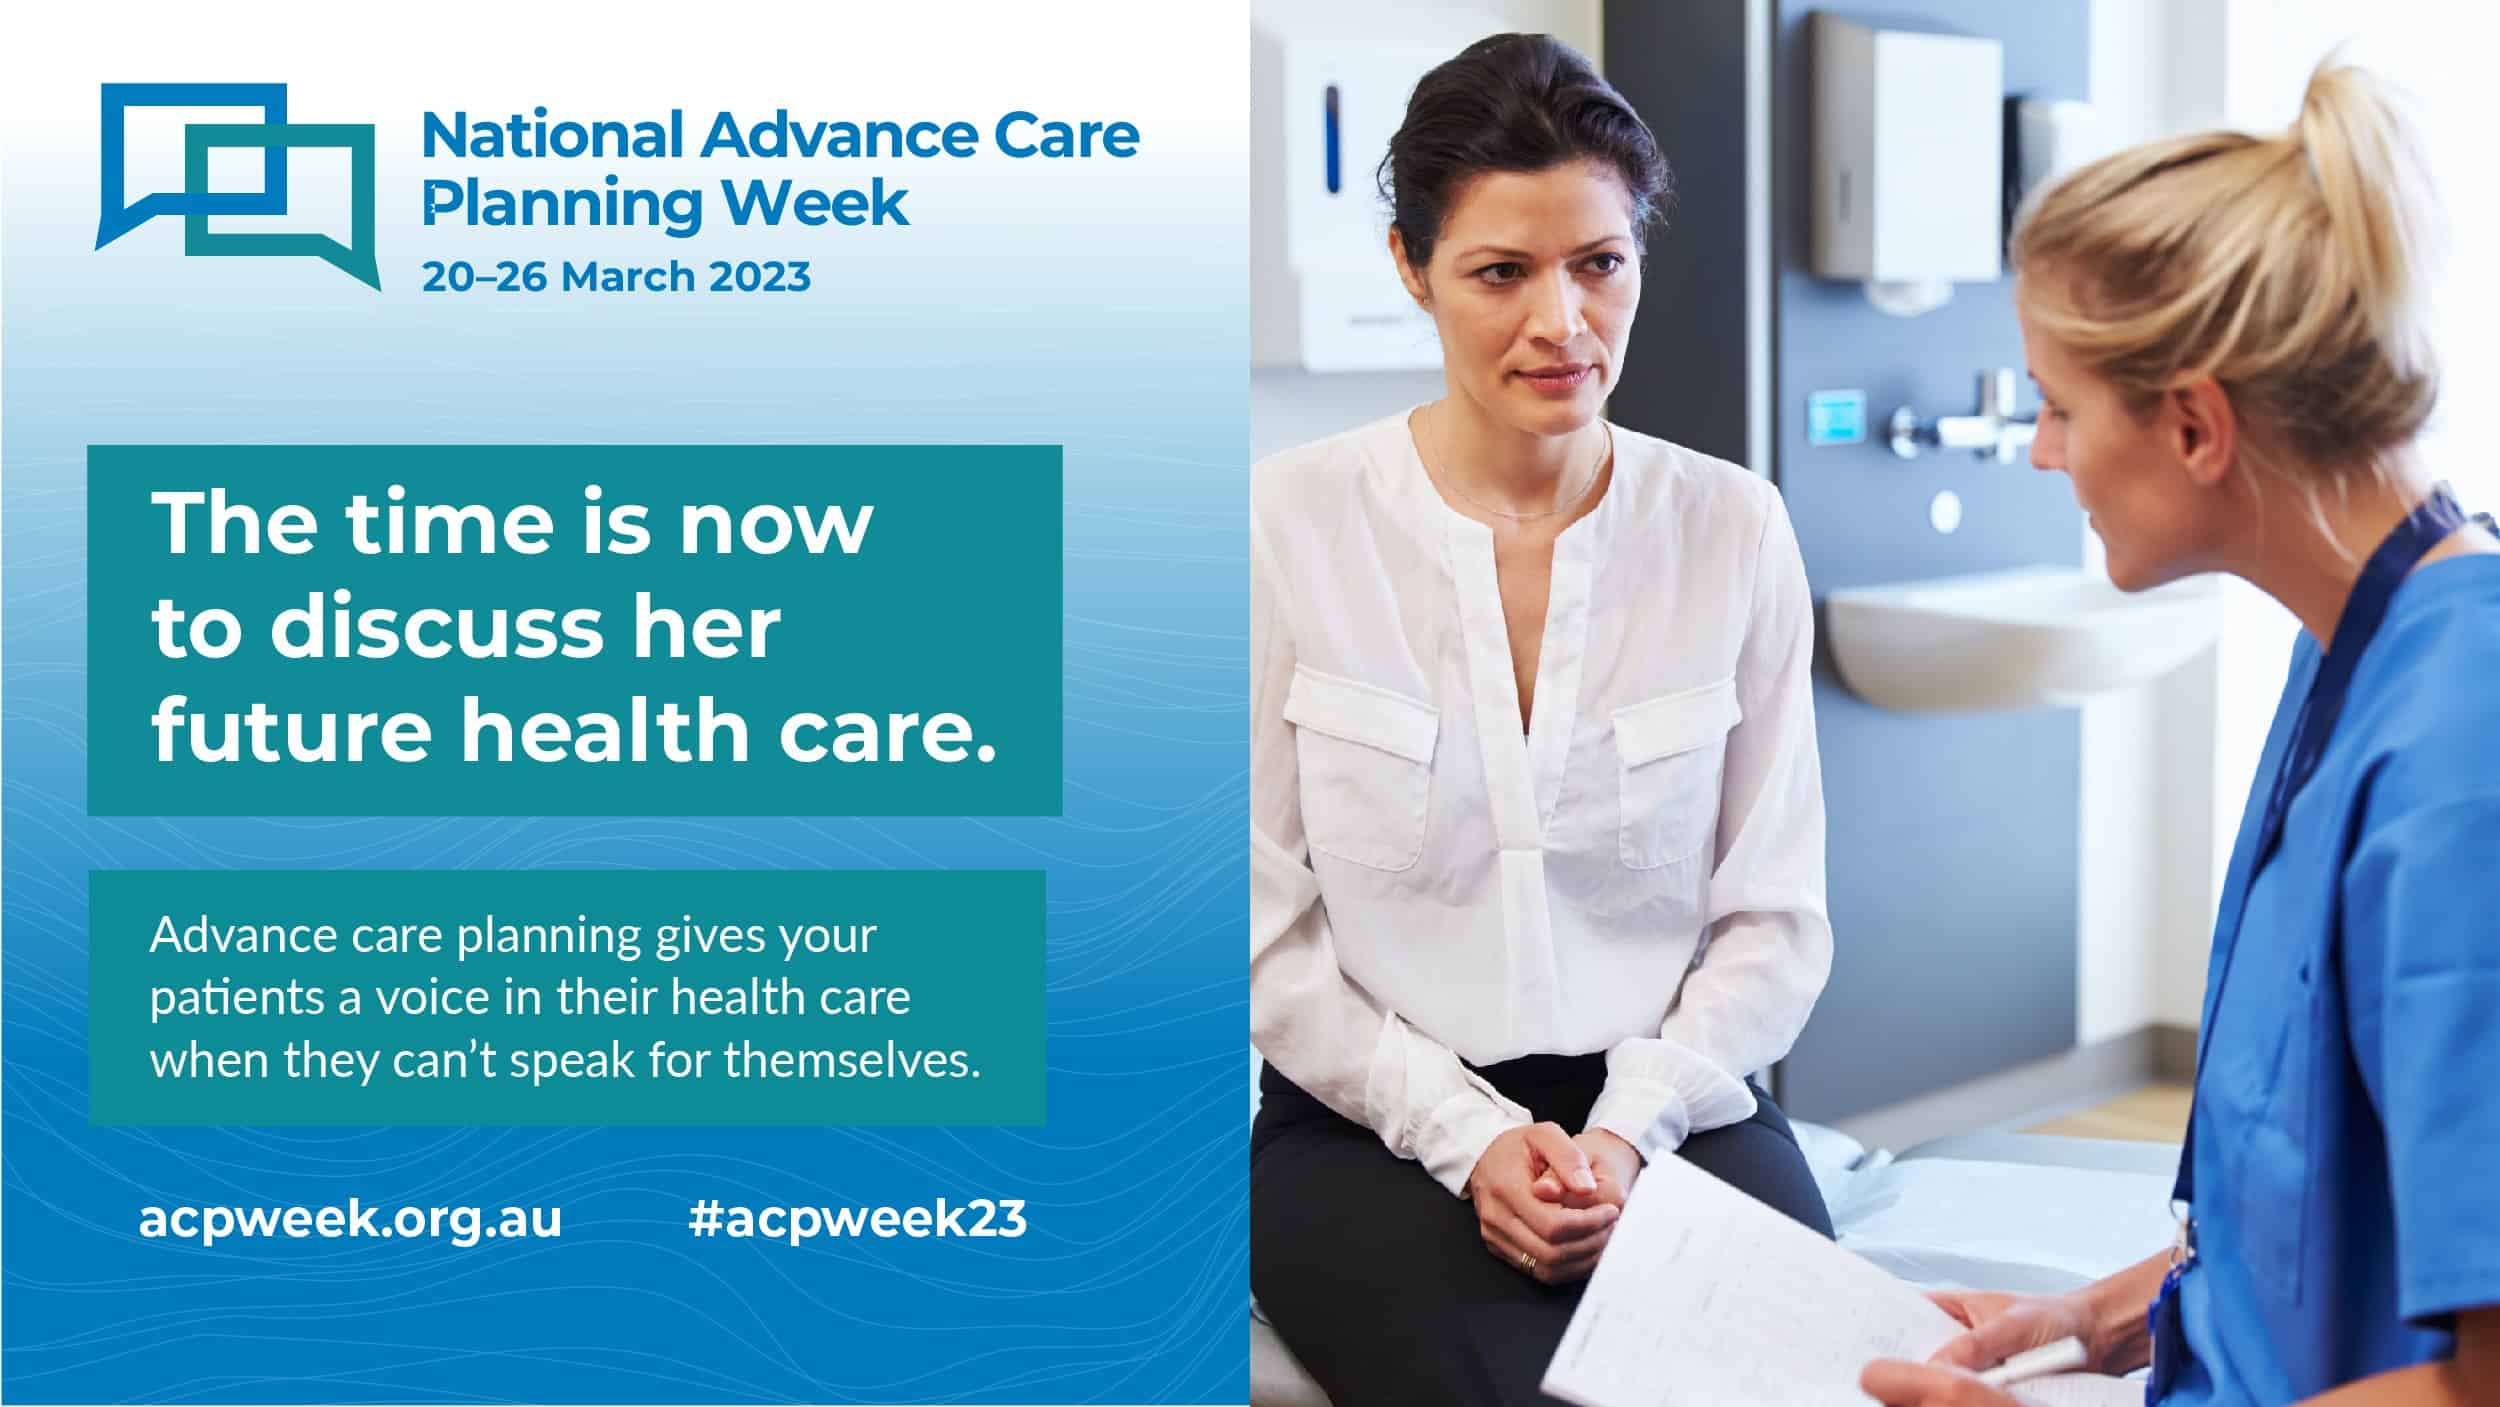 National Advance Care Planning Week